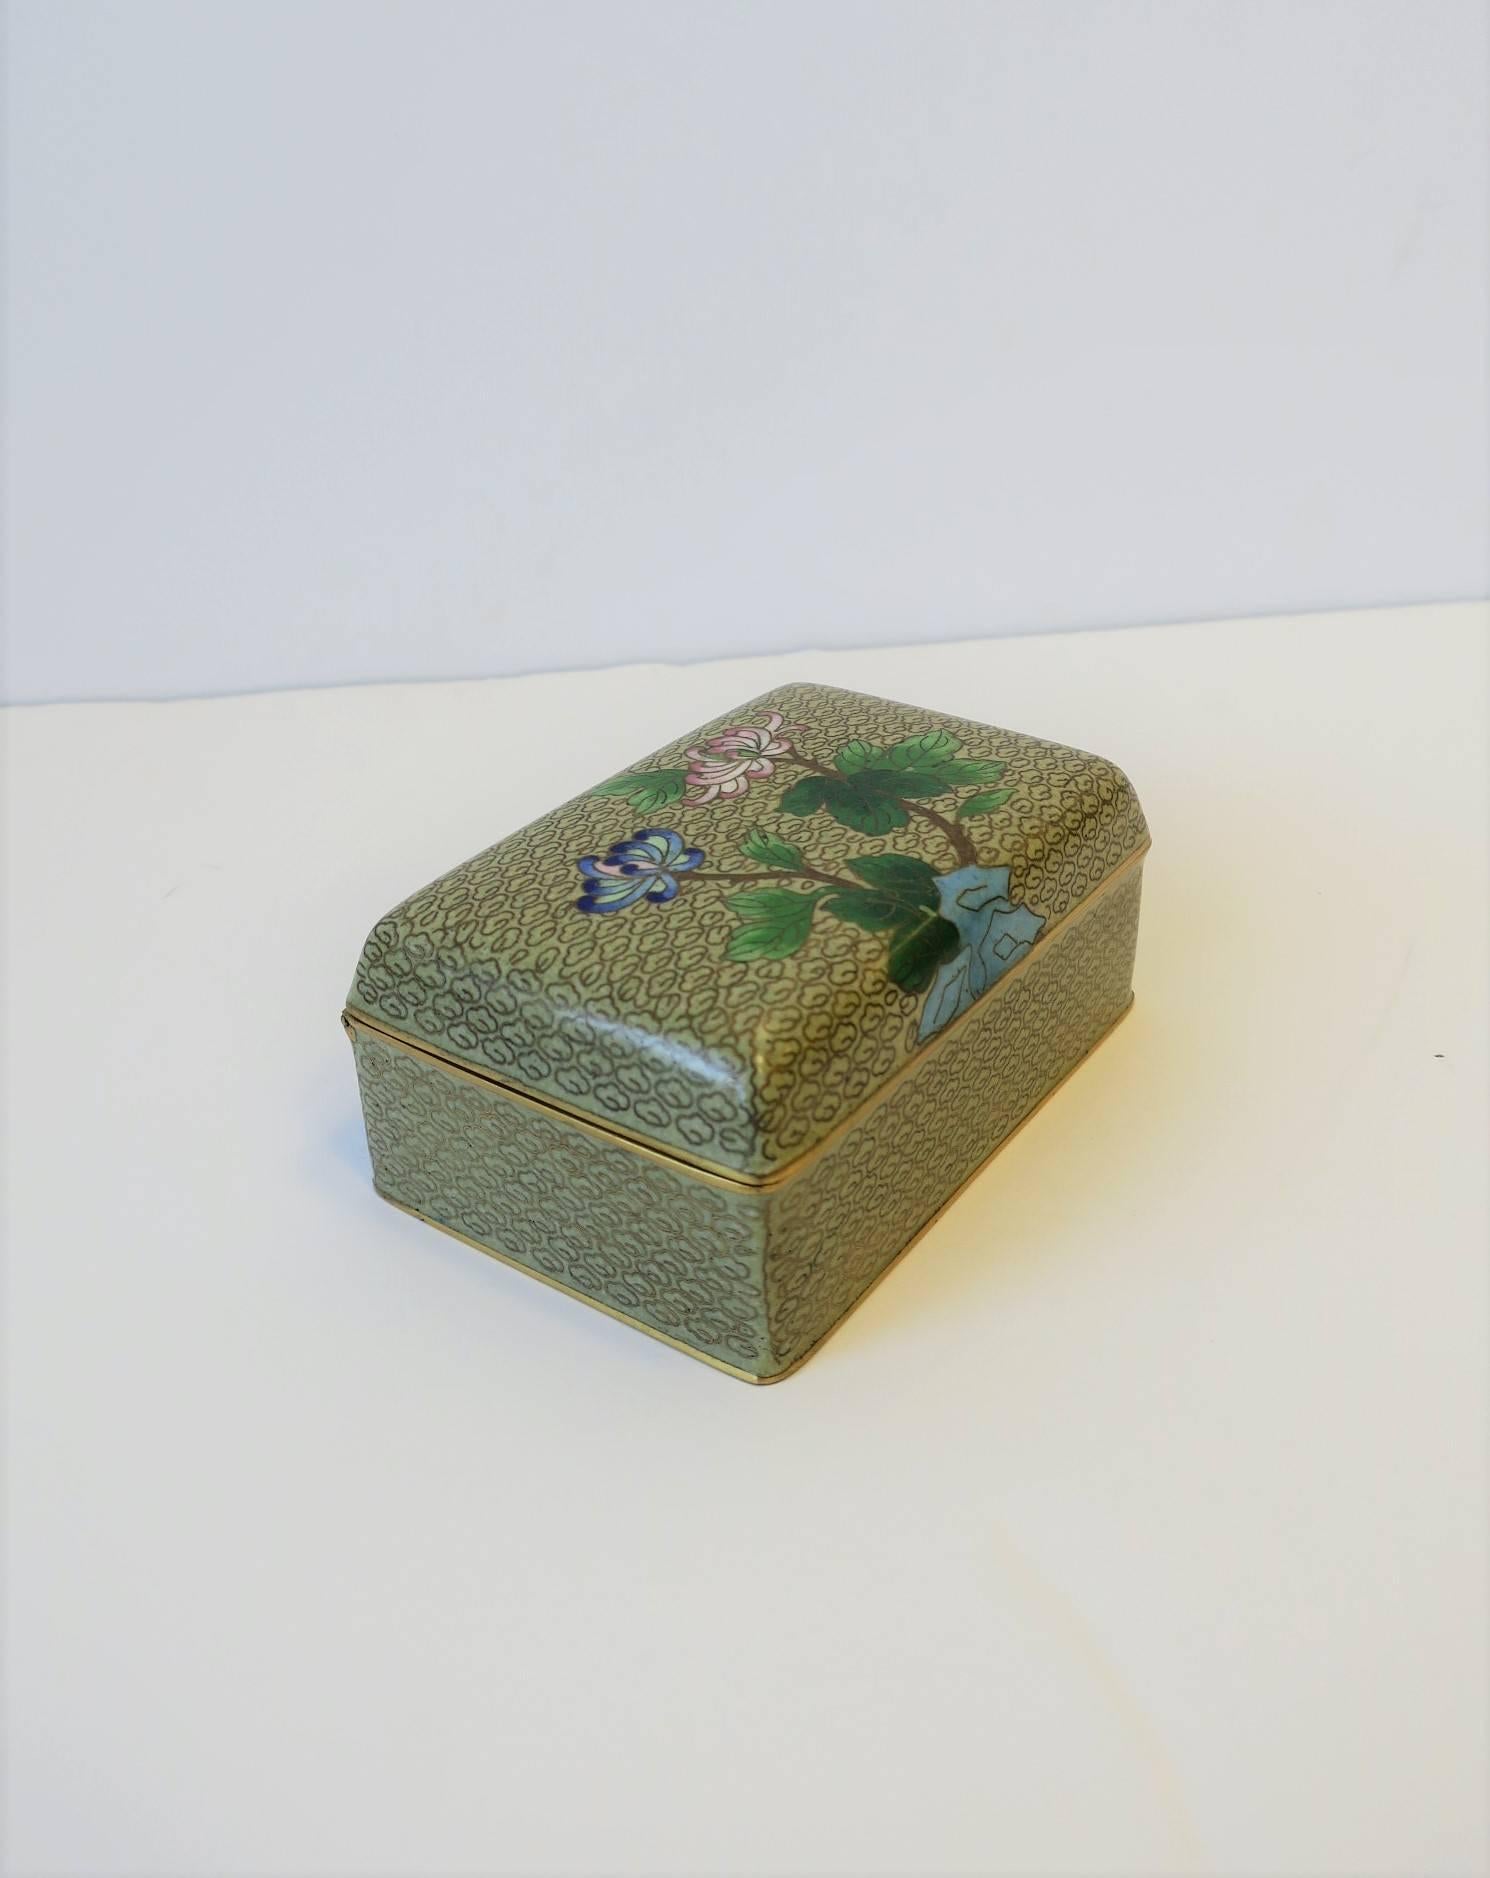 Cloissoné Chinese Cloisonné Enamel and Brass Jewelry Box